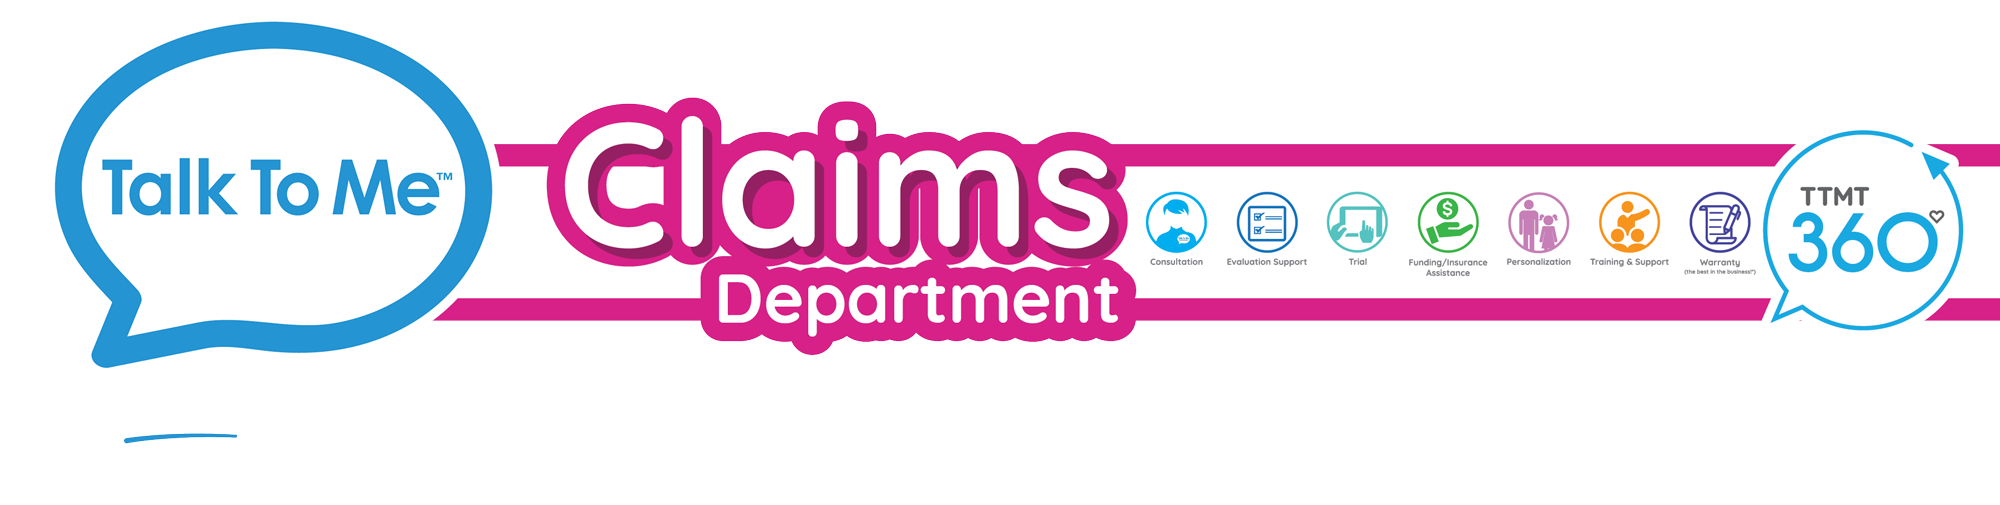 claims department header